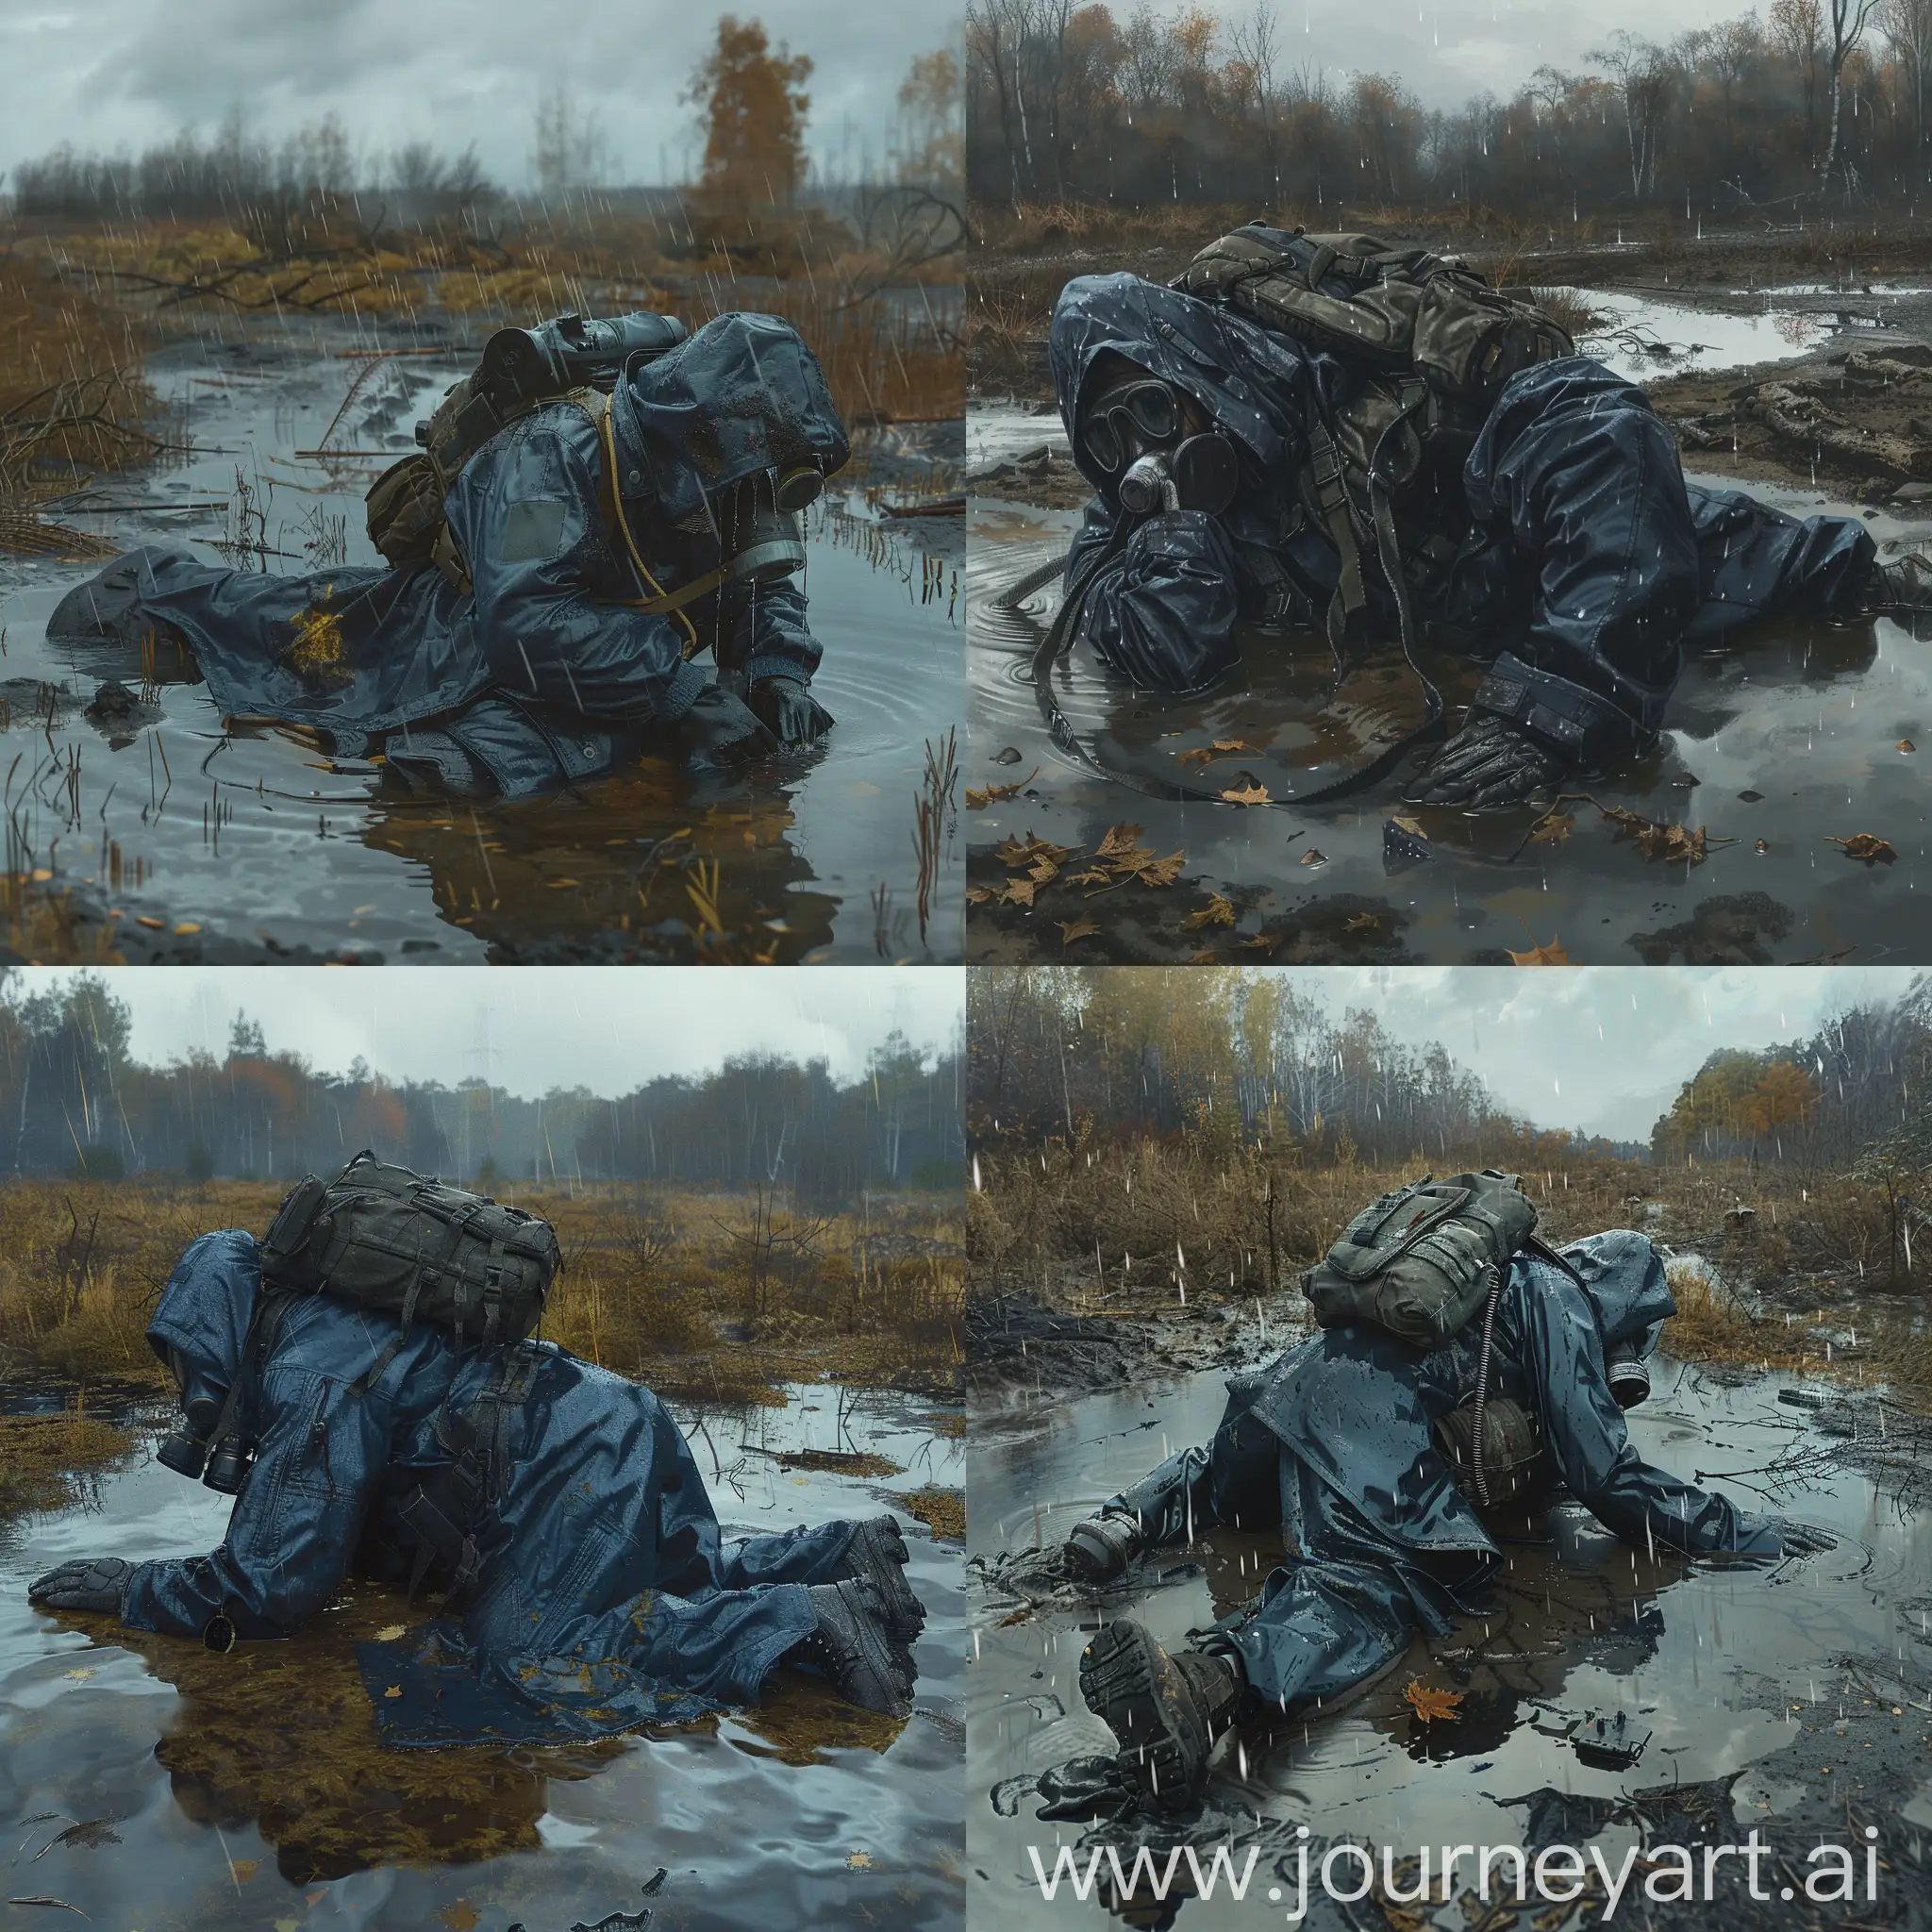 The STALKER universe, a dead mercenary guy in a dark blue military raincoat, in military unloading, with a backpack on his back, a gas mask on the mercenary's face, a dead mercenary lies in a dirty large puddle in the middle of a radioactive swamp, his corpse breathlessly peers into the sky, radioactive rain drips on the mercenary, the weather is gloomy autumn.